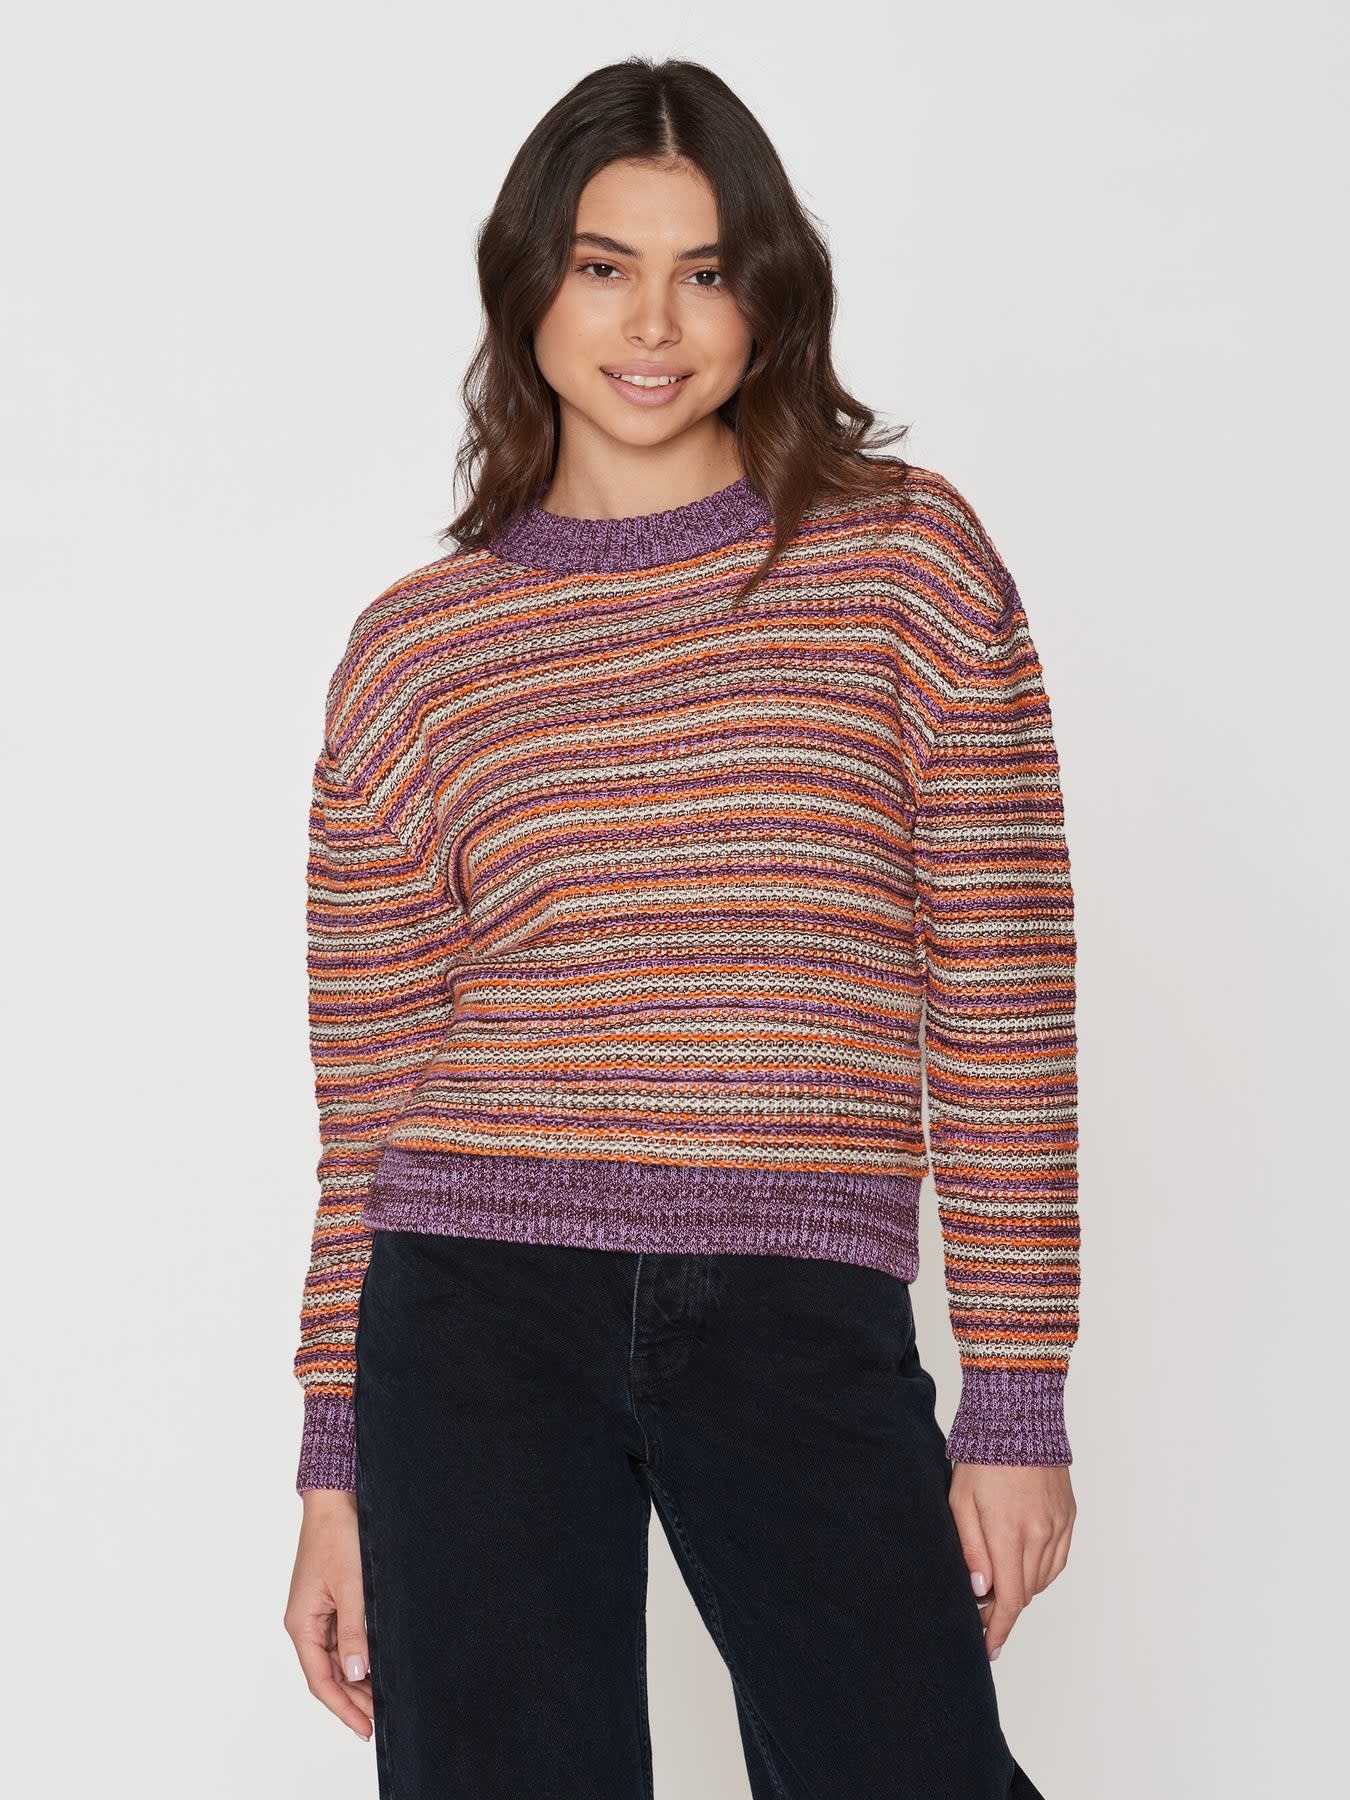 KnowledgeCotton Apparel KnowledgeCotton, Knitted Crew Neck, multicolor, M